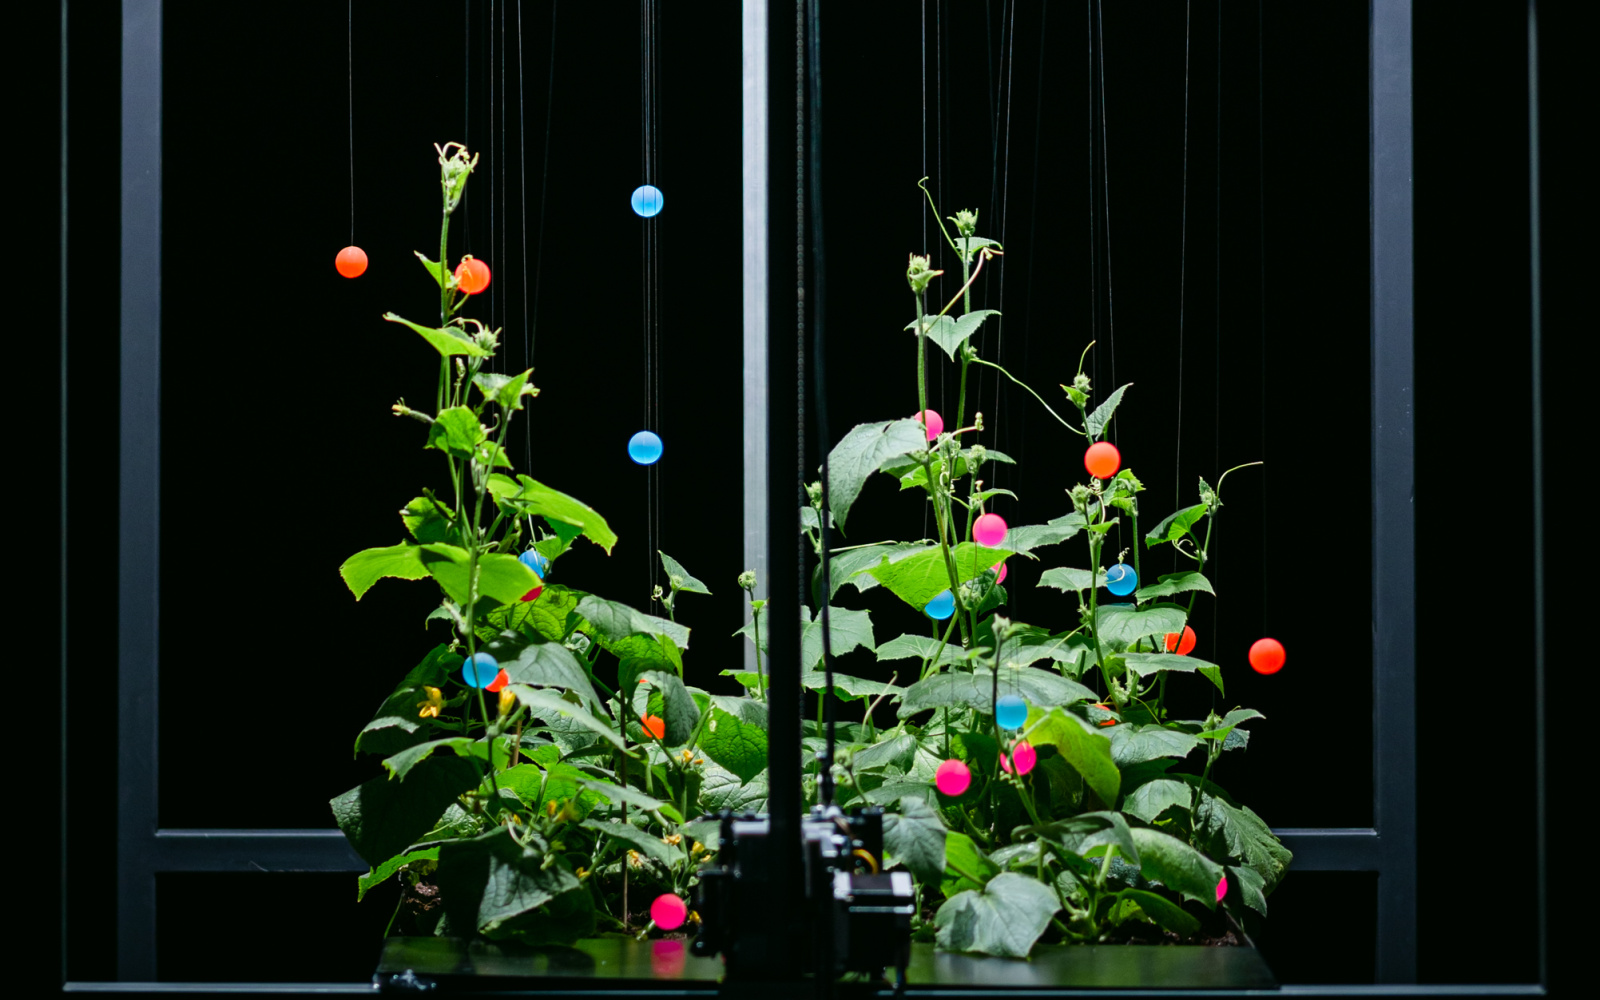 Two cucumber plants stand in a black room, strings hang down from the ceiling with colourful little balls attached to the ends. 